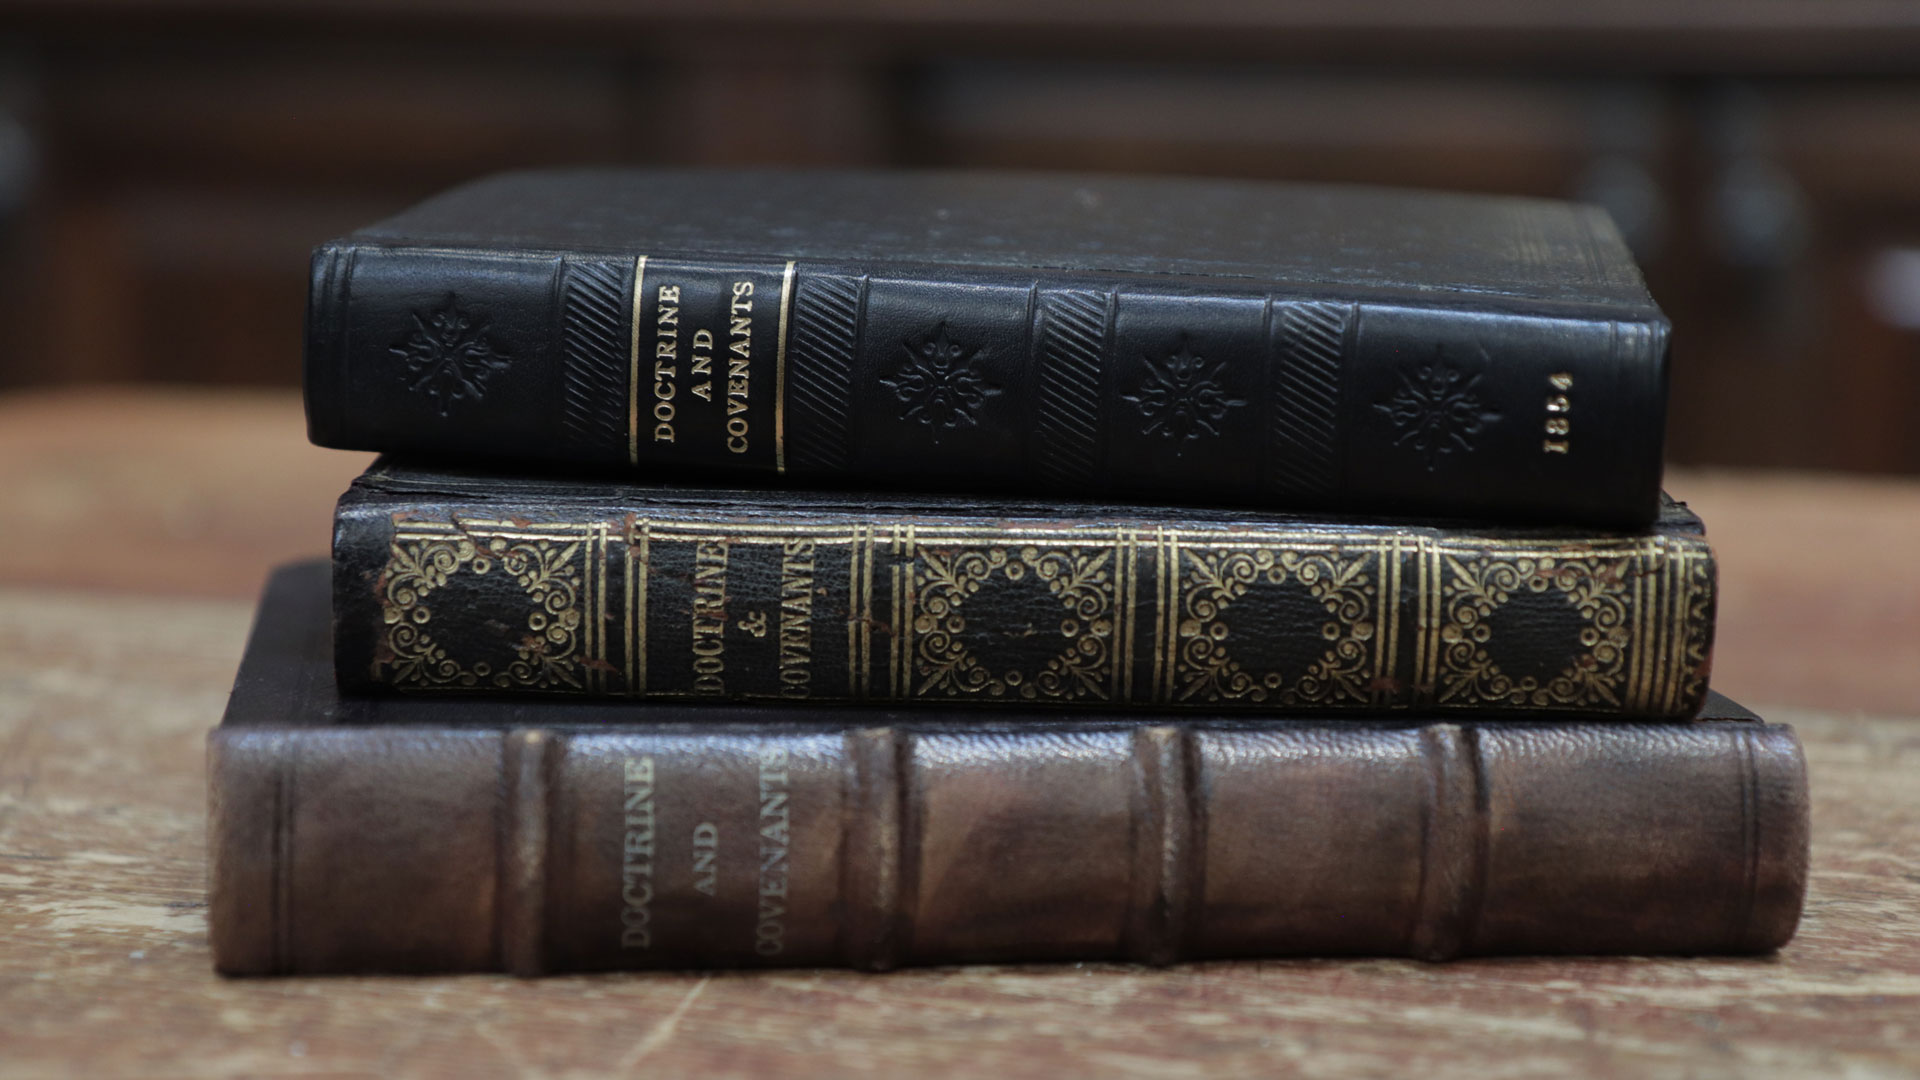 Antique editions of the Doctrine and Covenants, courtesy of Reid Moon. Photograph by Daniel Smith.